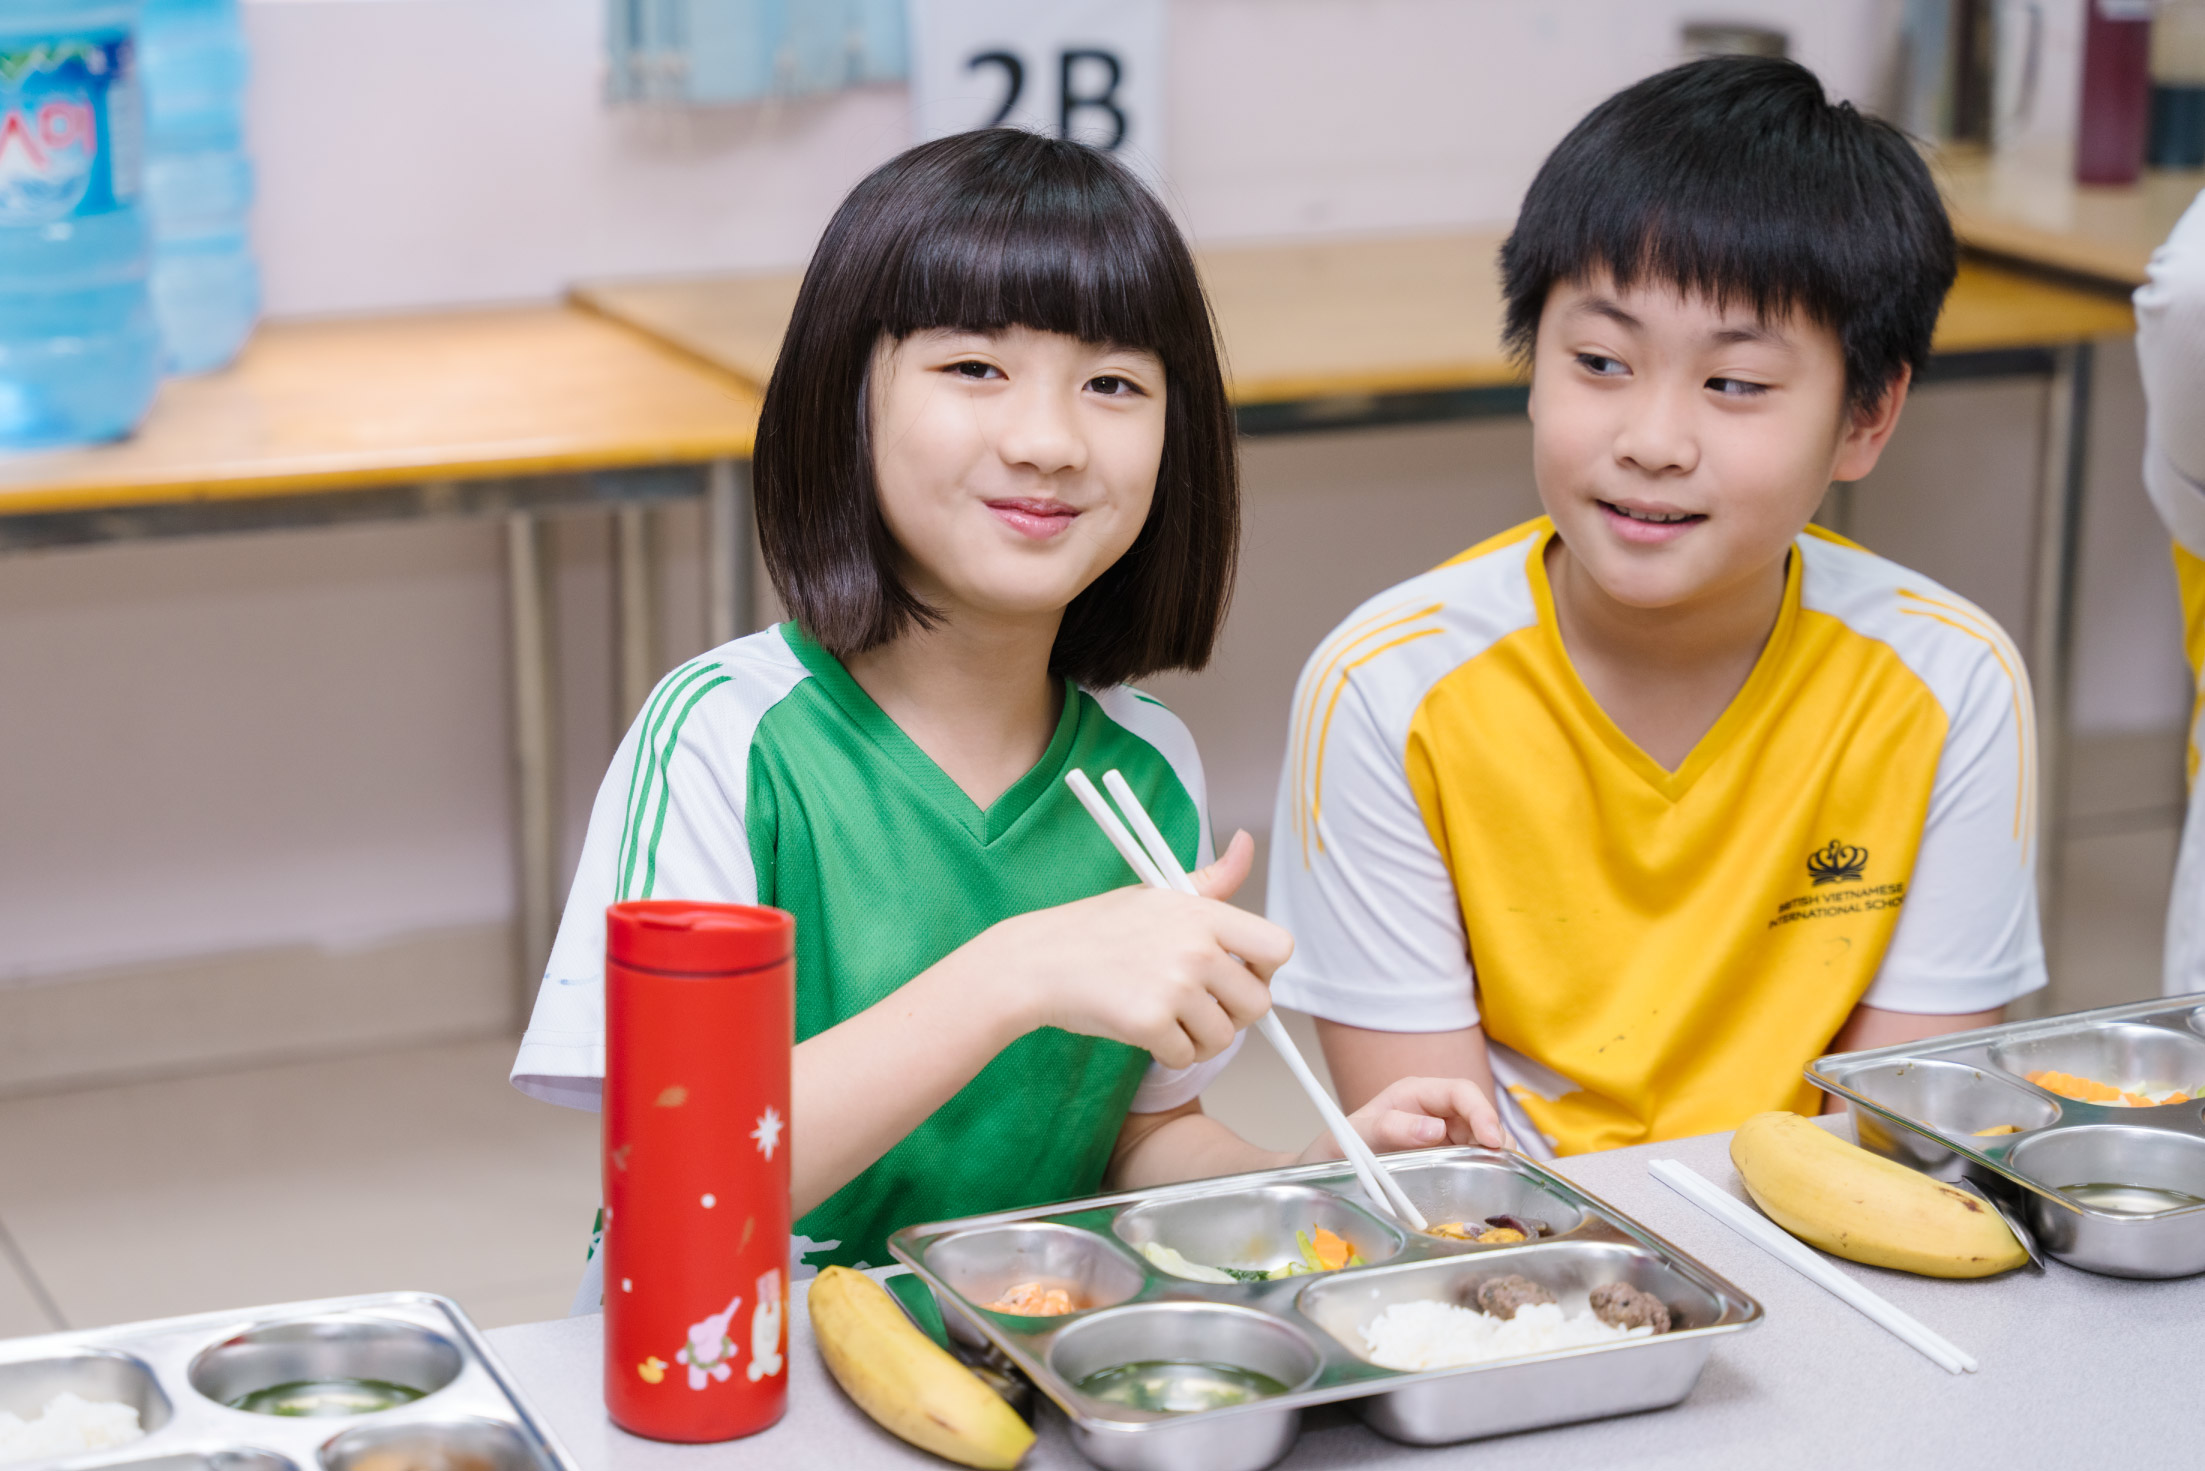 The power of wellbeing in education strengthens in Vietnam through Nord Anglia Education-The power of wellbeing in education strengthens in Vietnam through Nord Anglia Education-1Blog-1 (1)